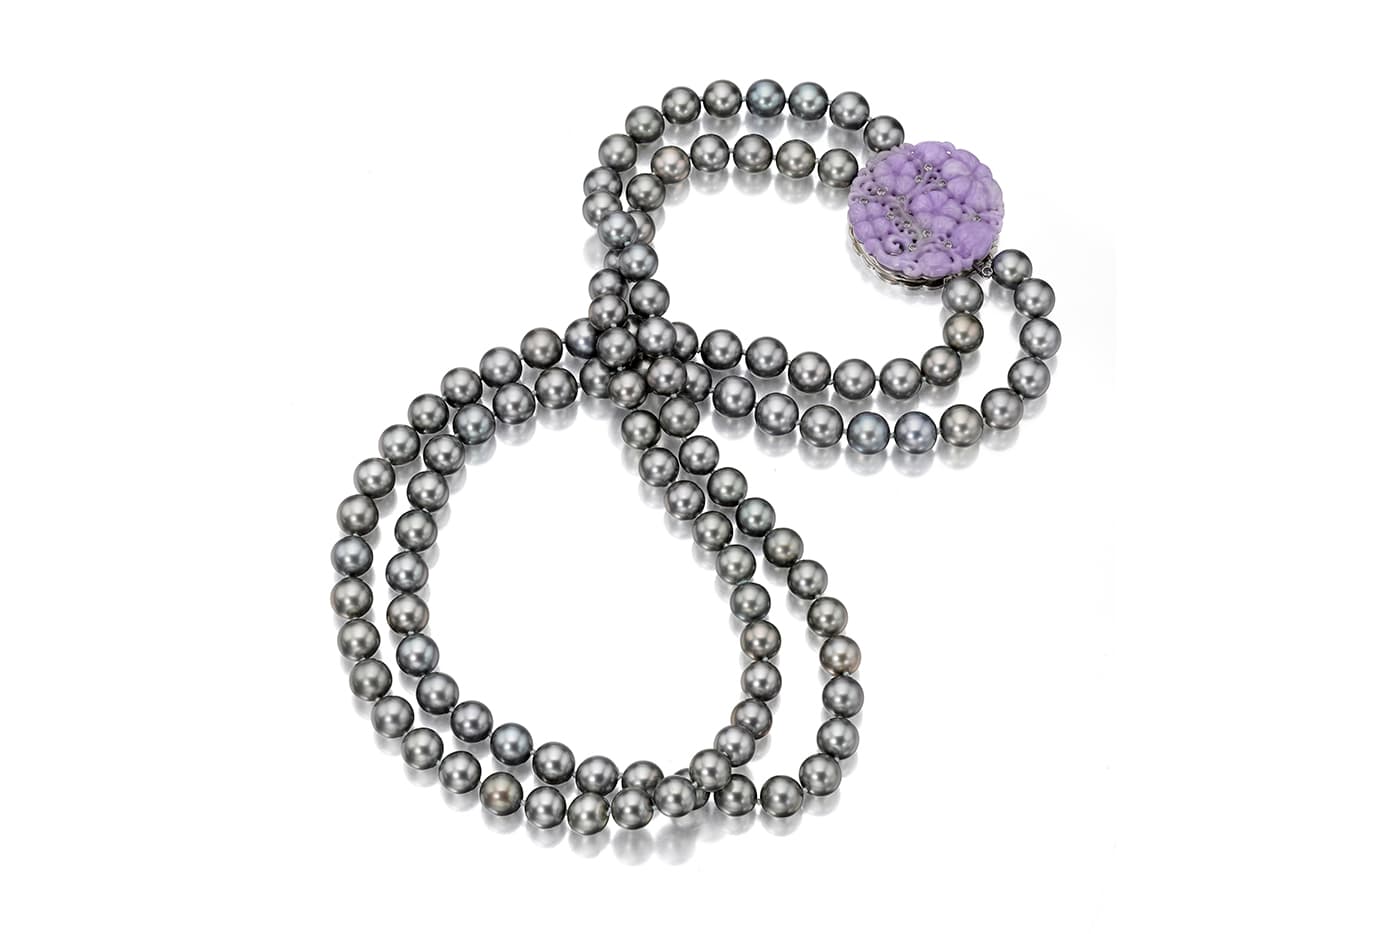 Tahitian pearl necklace with a lavender carved jadeite and diamond clasp set in platinum by Assael